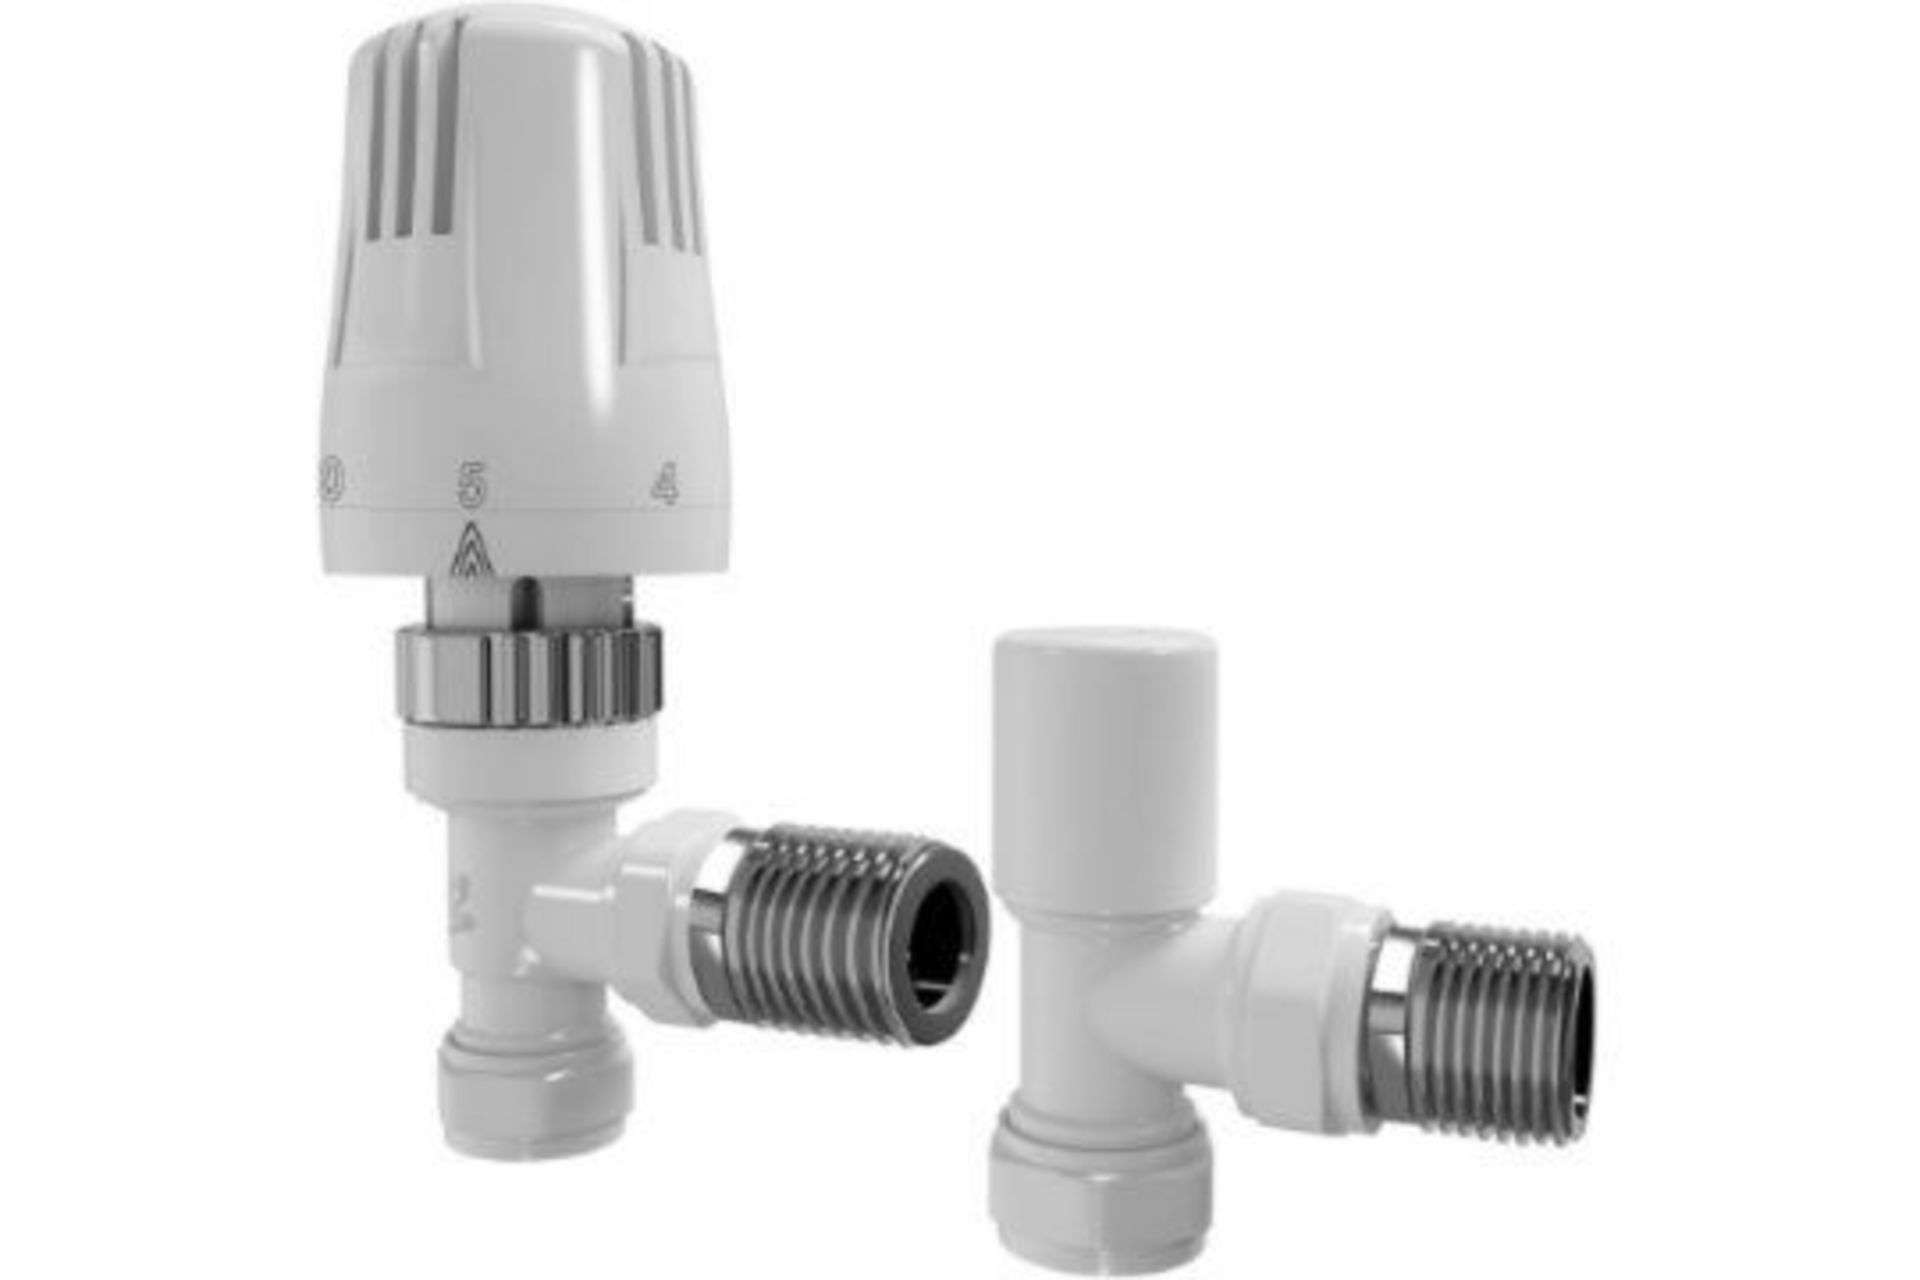 New & Boxed White Thermostatic Angled Radiator Valves Trv T15mm Central Heating Taps. Ra32A